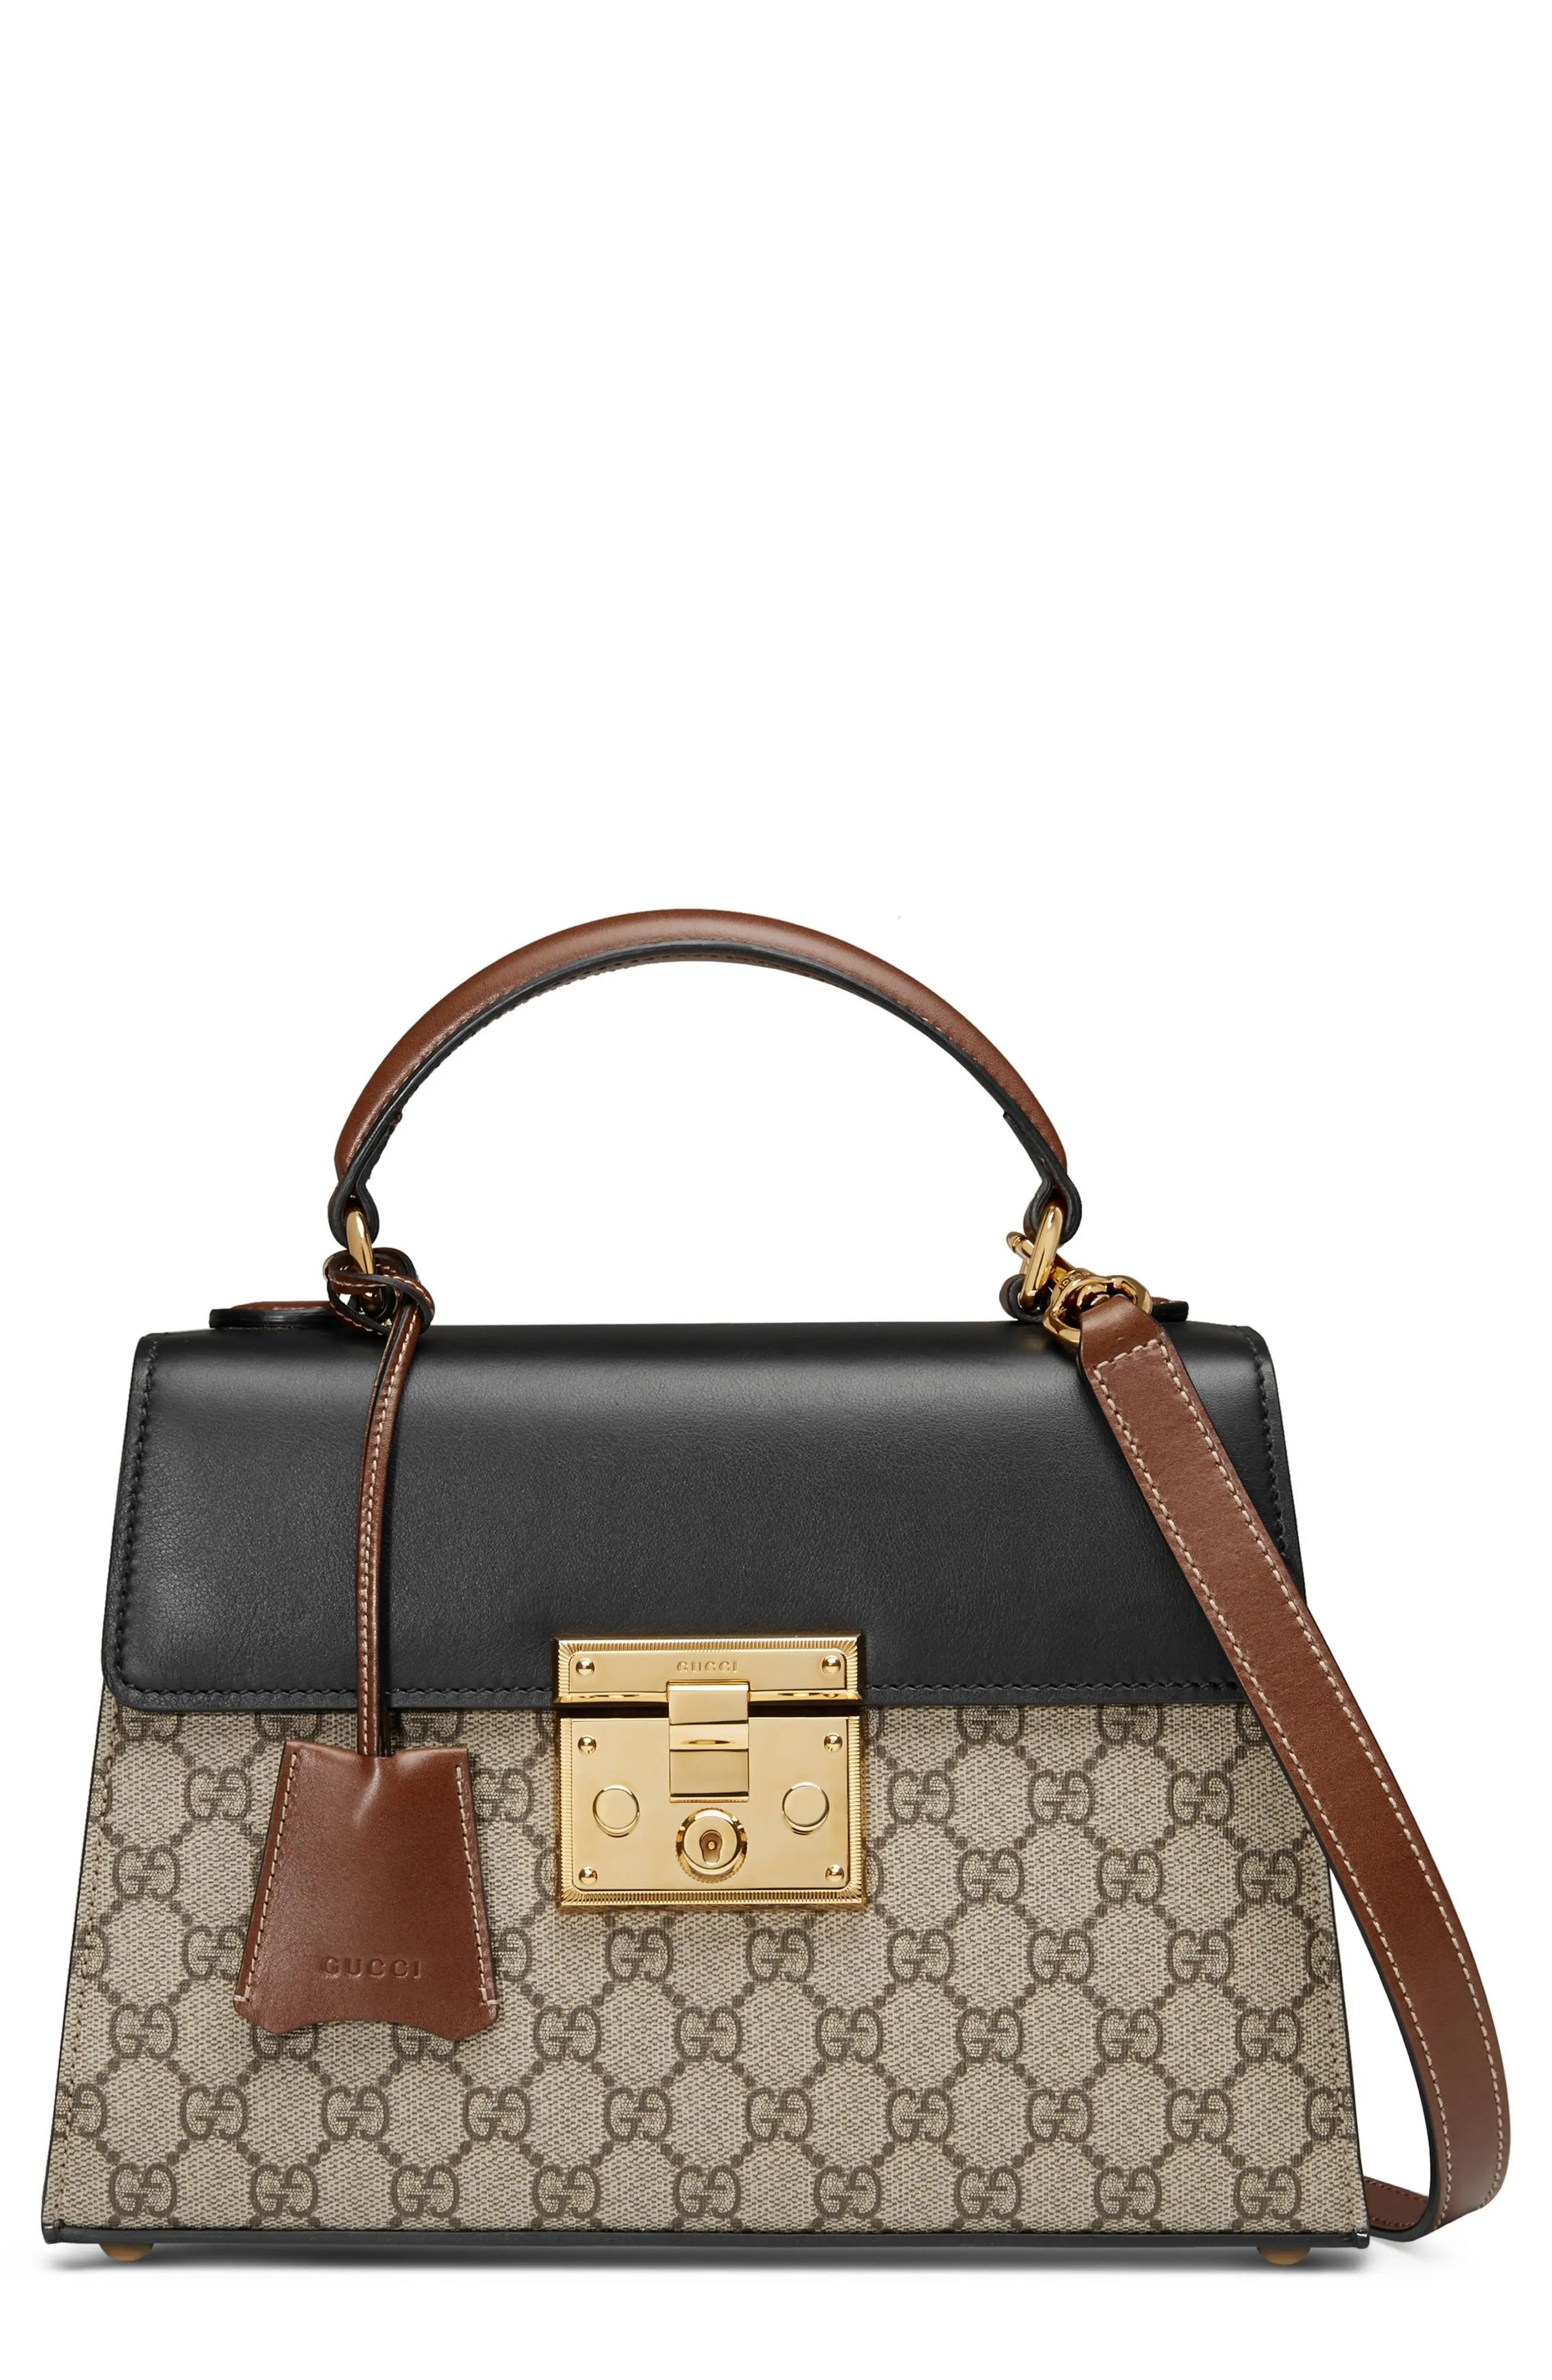 Gucci Small Padlock GG Supreme Canvas & Leather Top Handle Satchel | Nordstrom